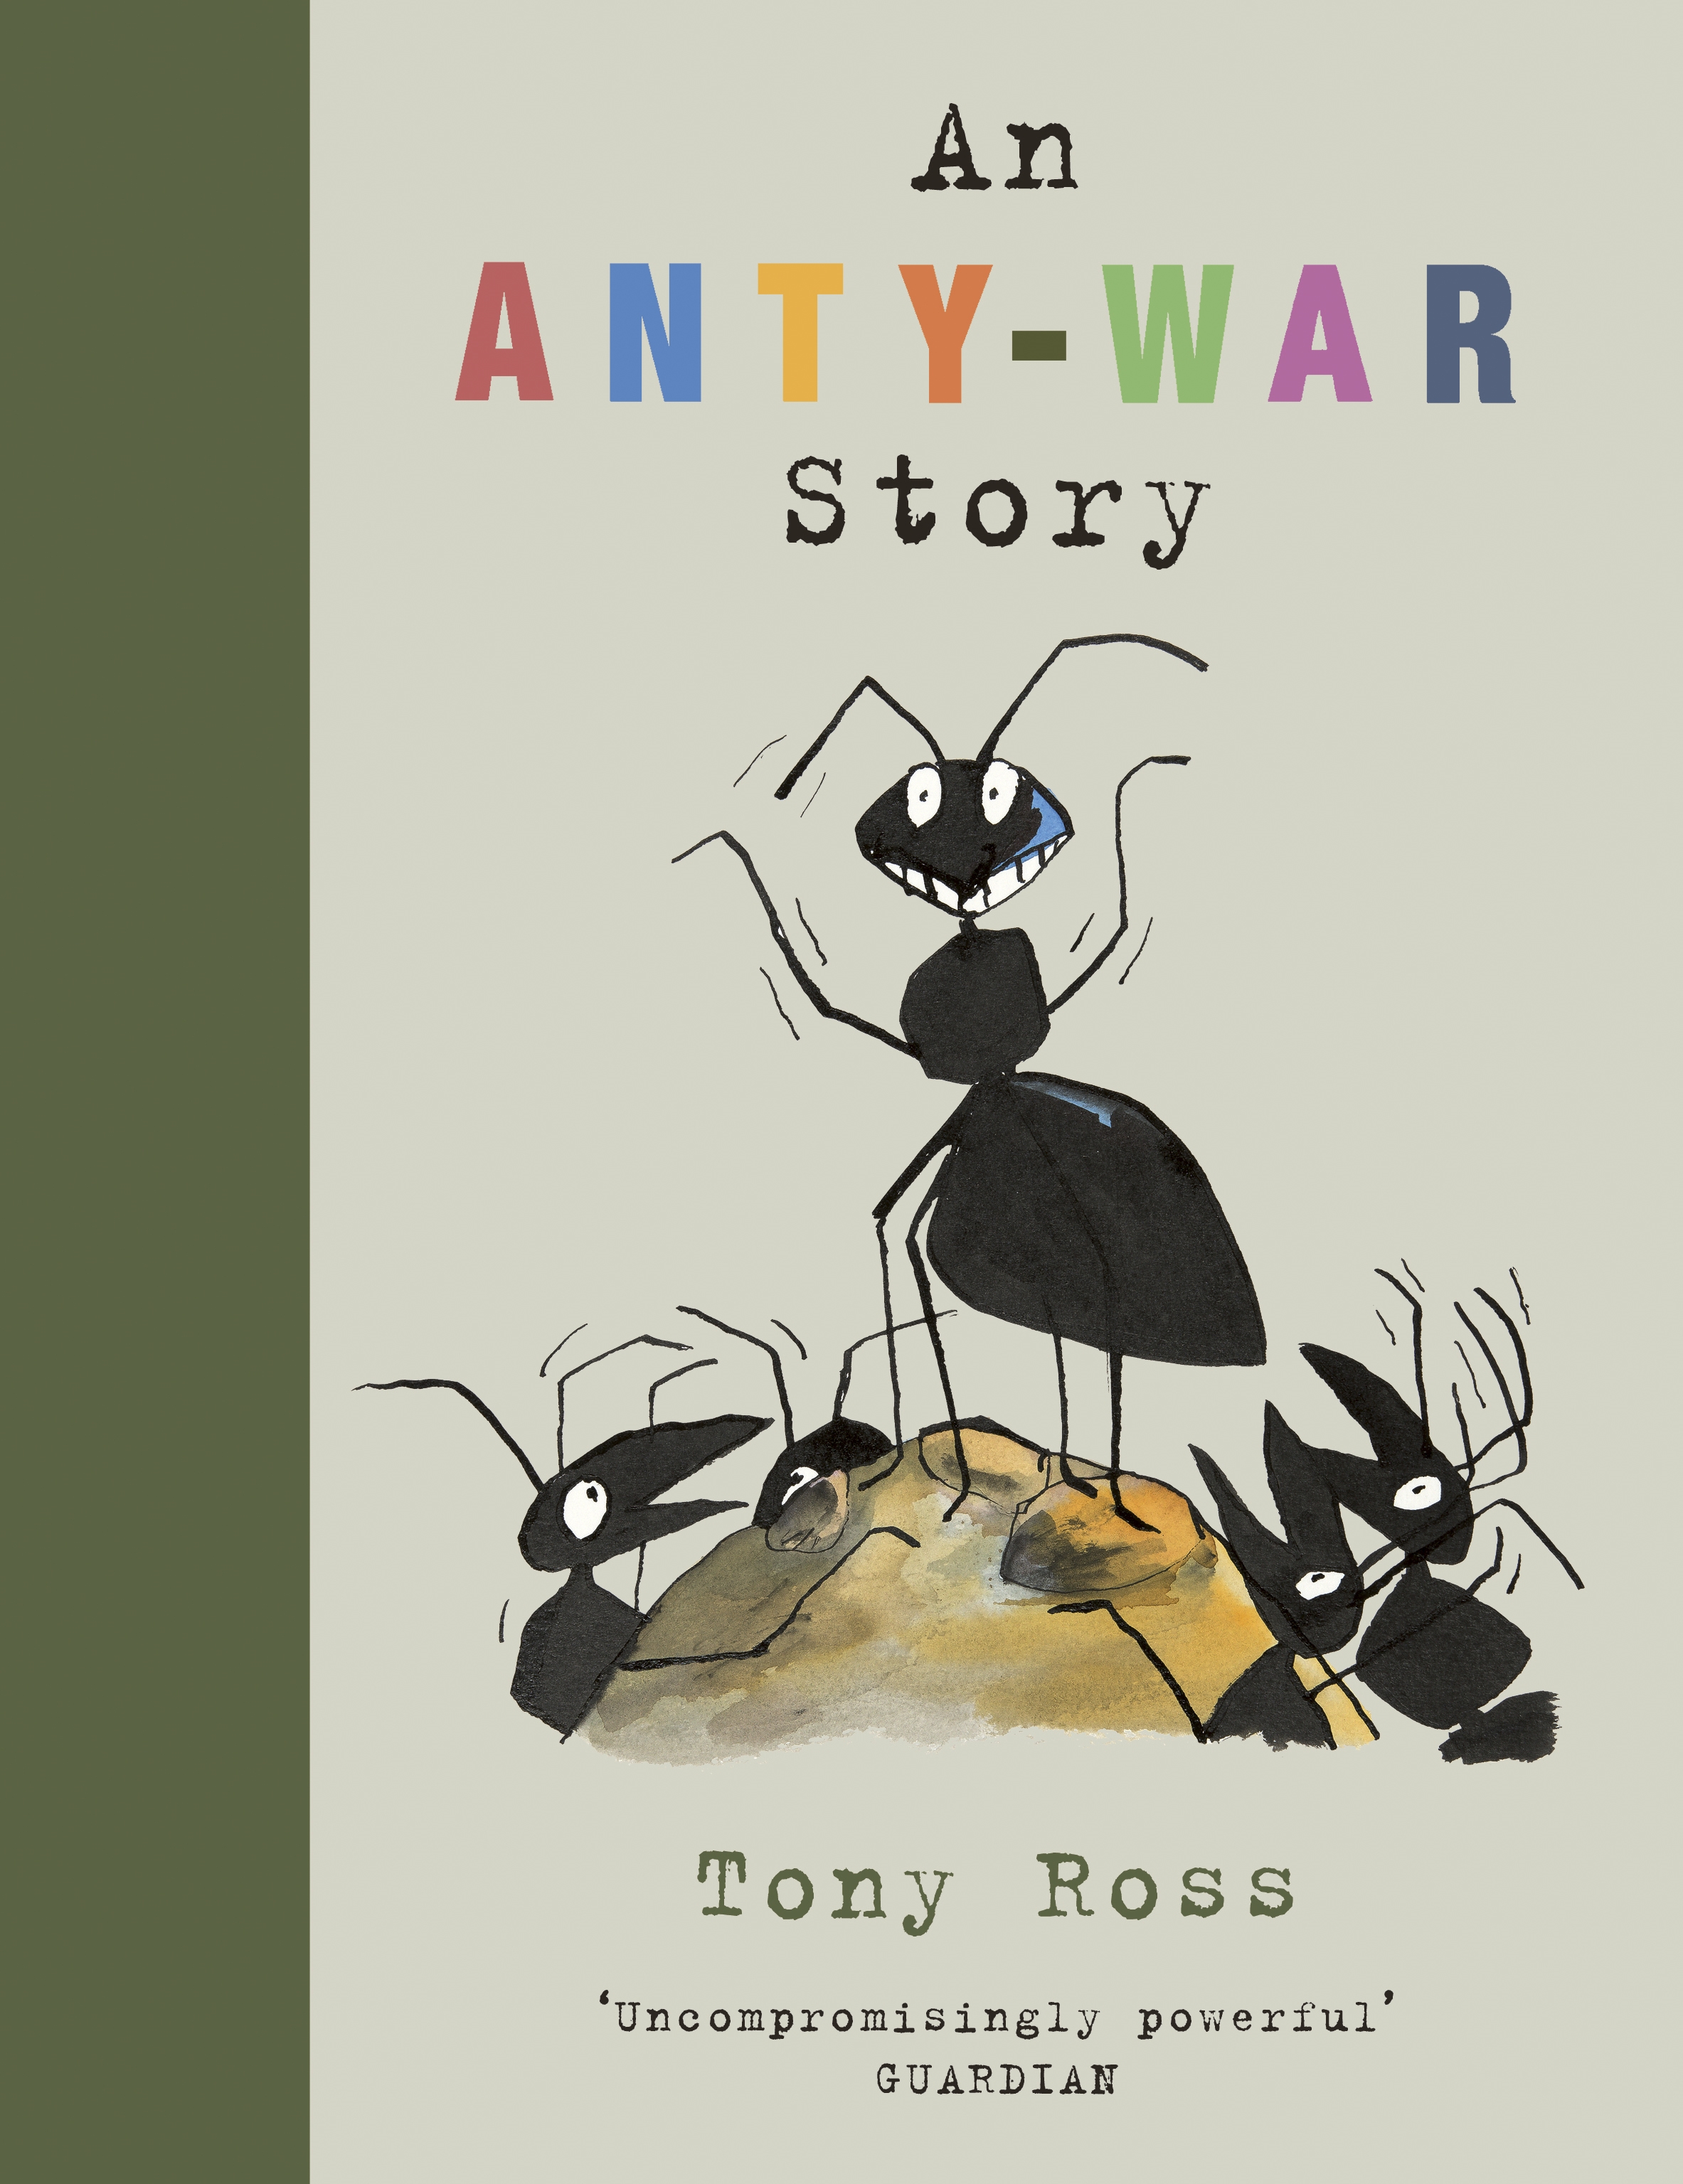 An Anty-War Story